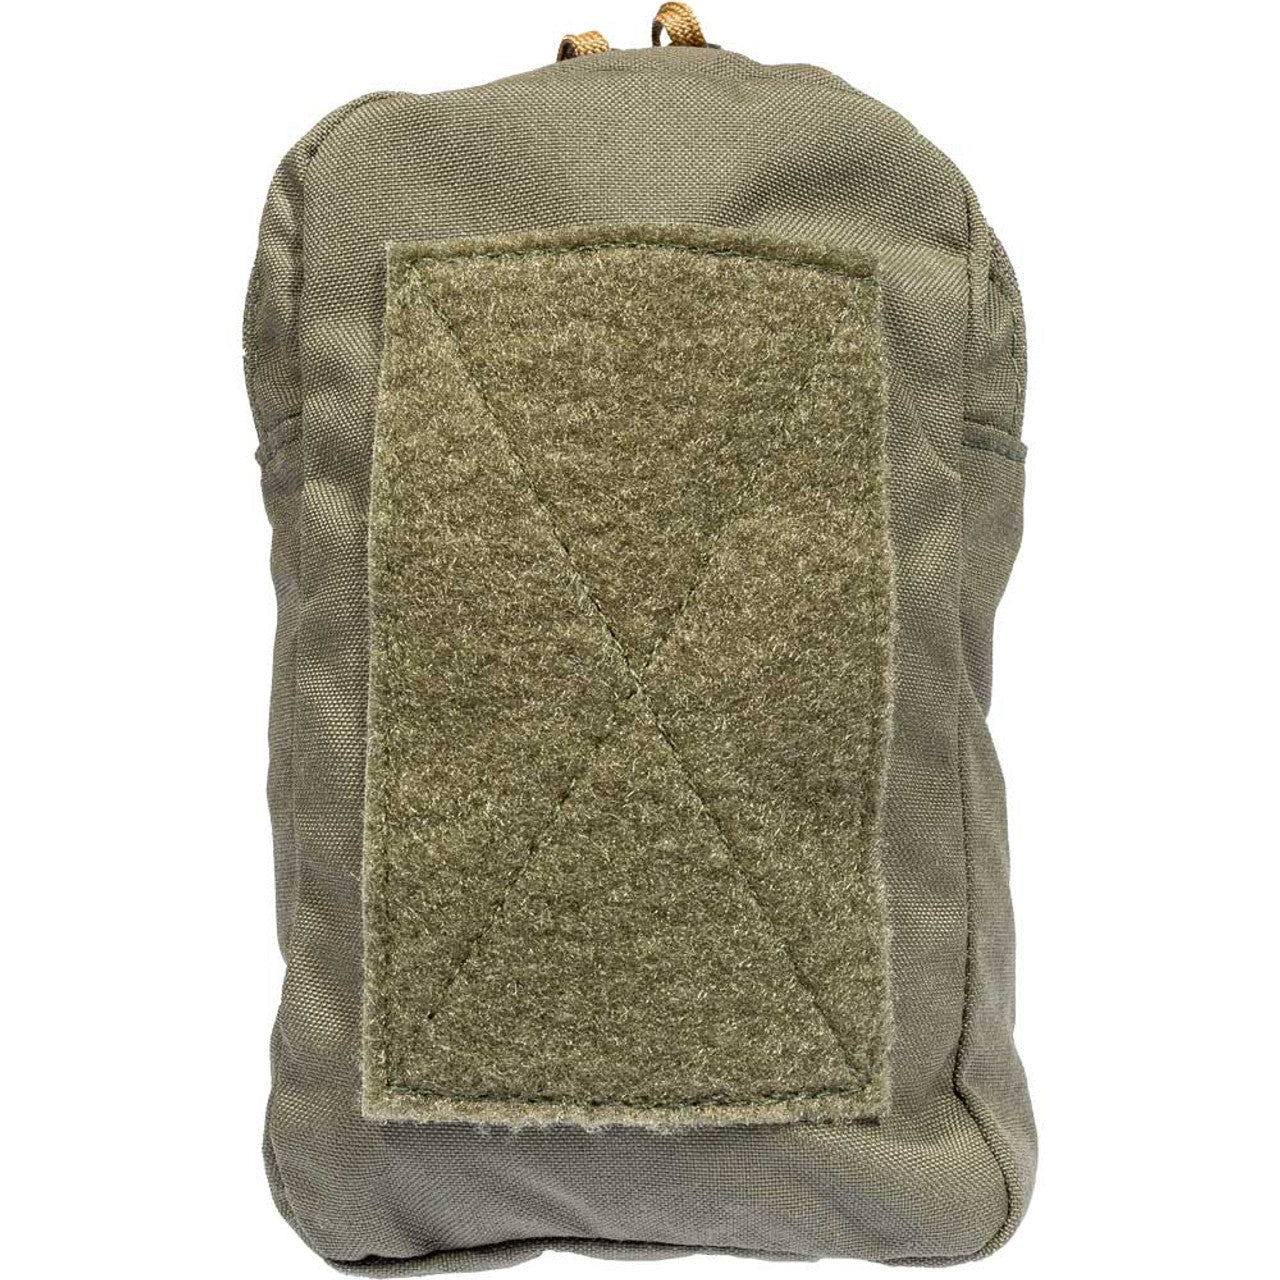 Tactical Tailor Fight Light Accessory Pouch 1-V